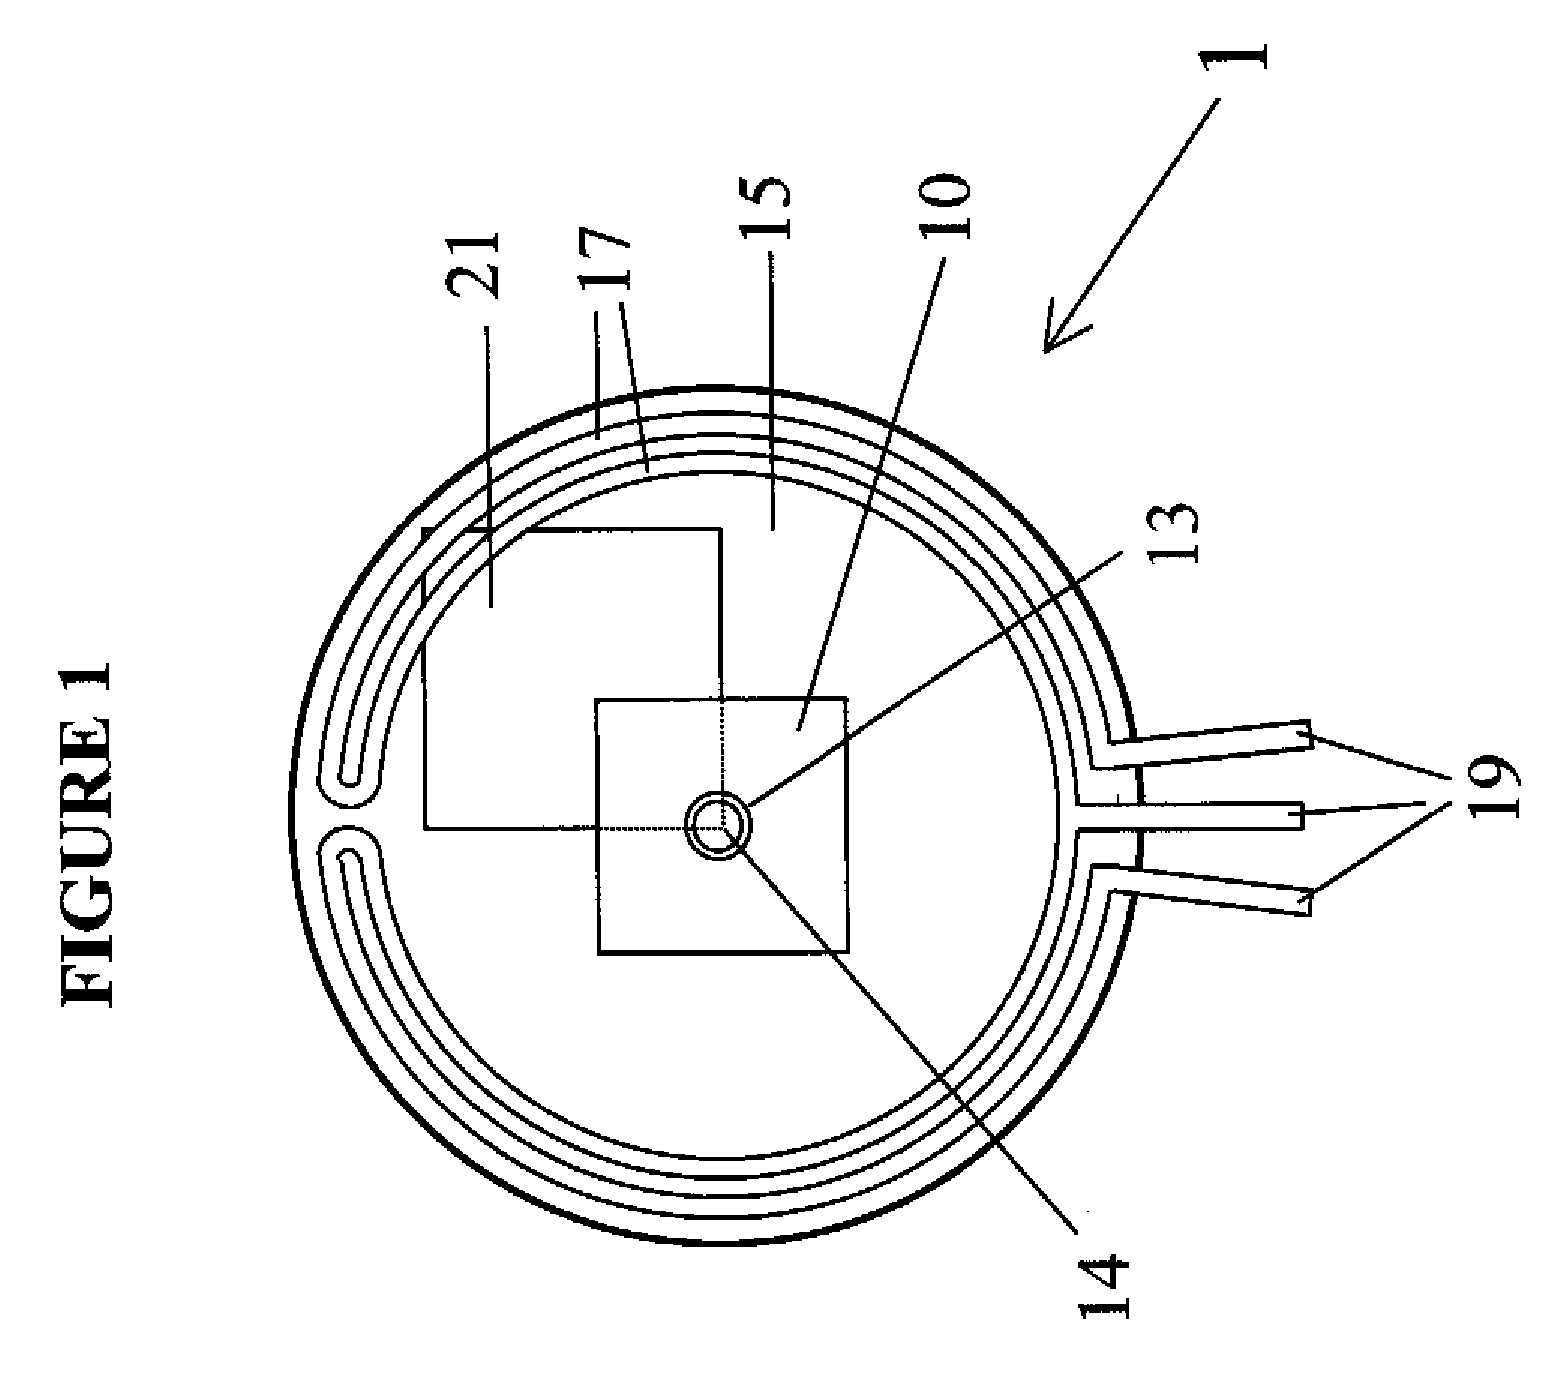 Apparatus for thermal control in the analysis of electronic devices